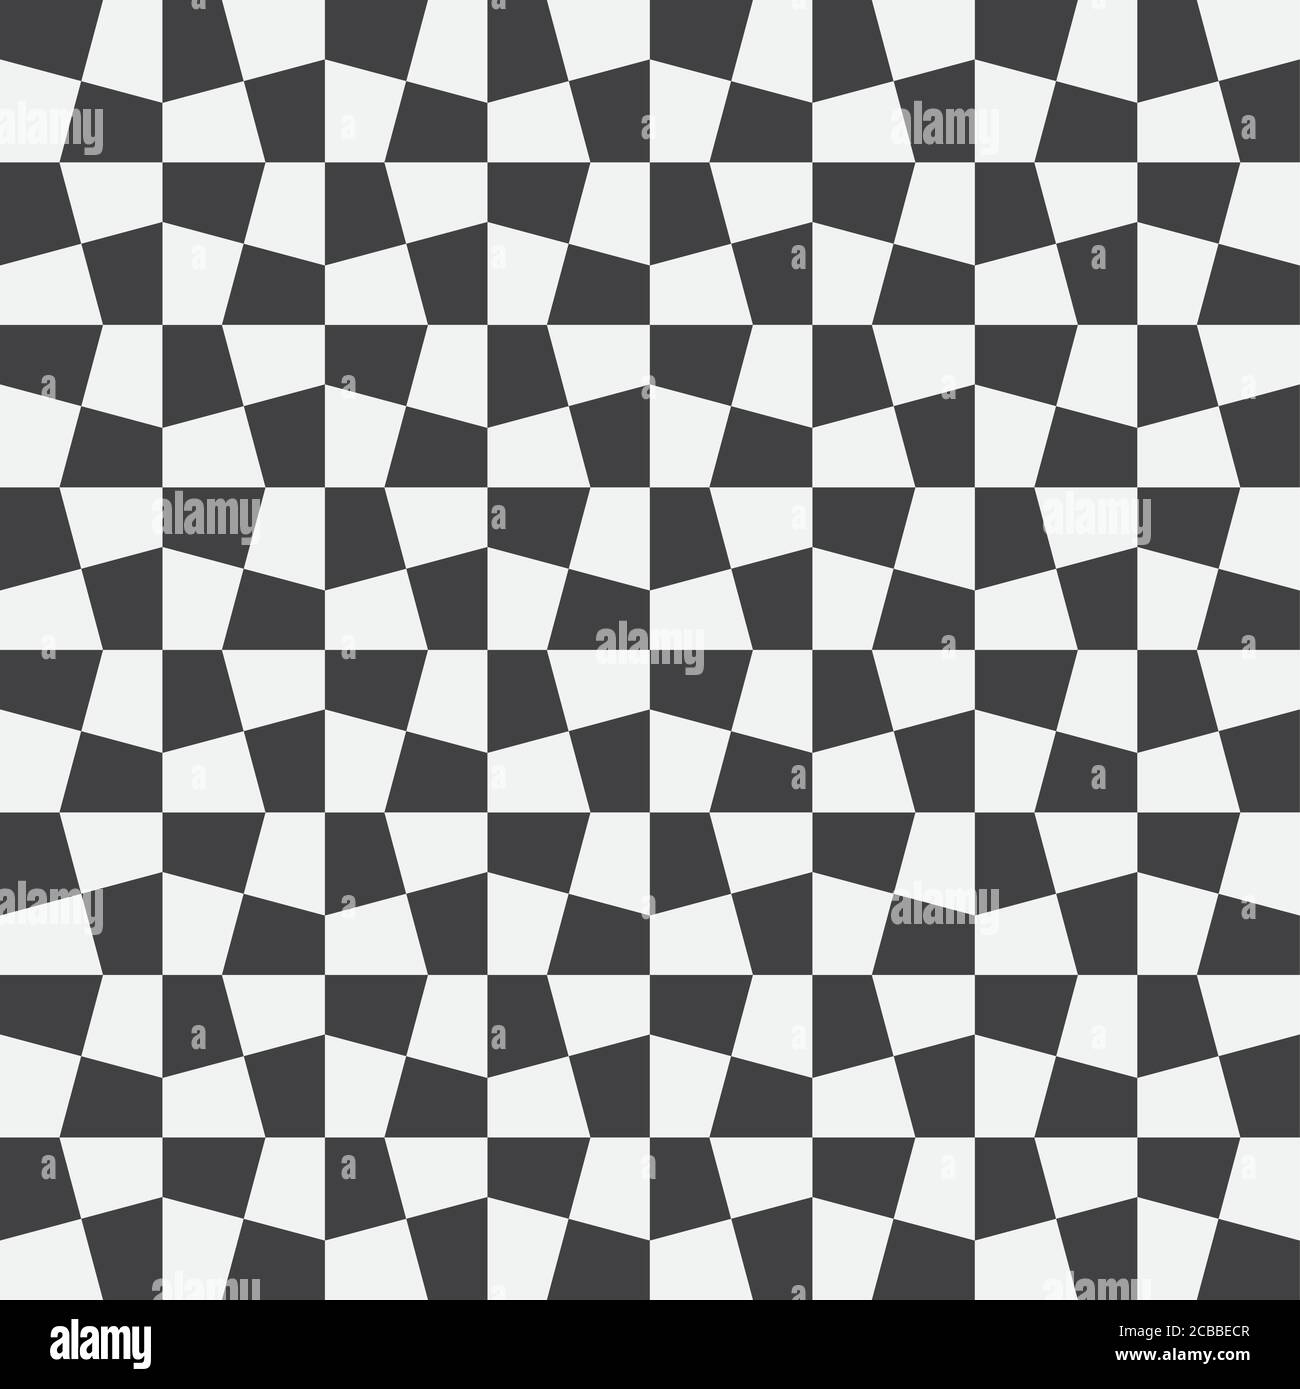 Unequal checks, abstract checkered background. Vector illustration. Background with black and white seamless checkered pattern. Seamless vector patter Stock Vector